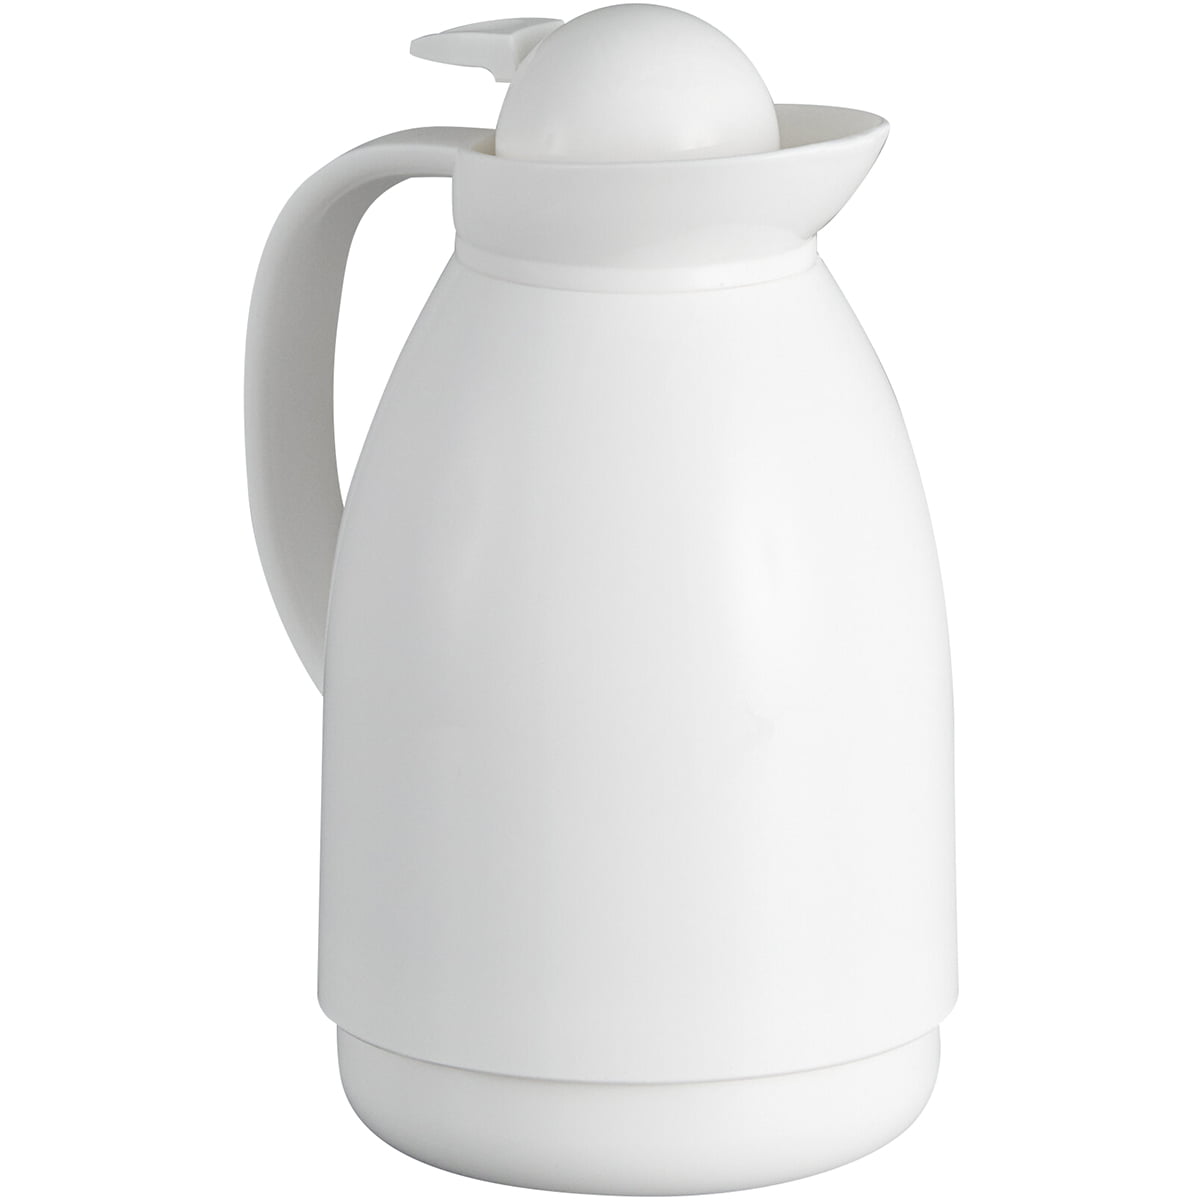 White space-age Thermos carafe / coffee butler / water jug